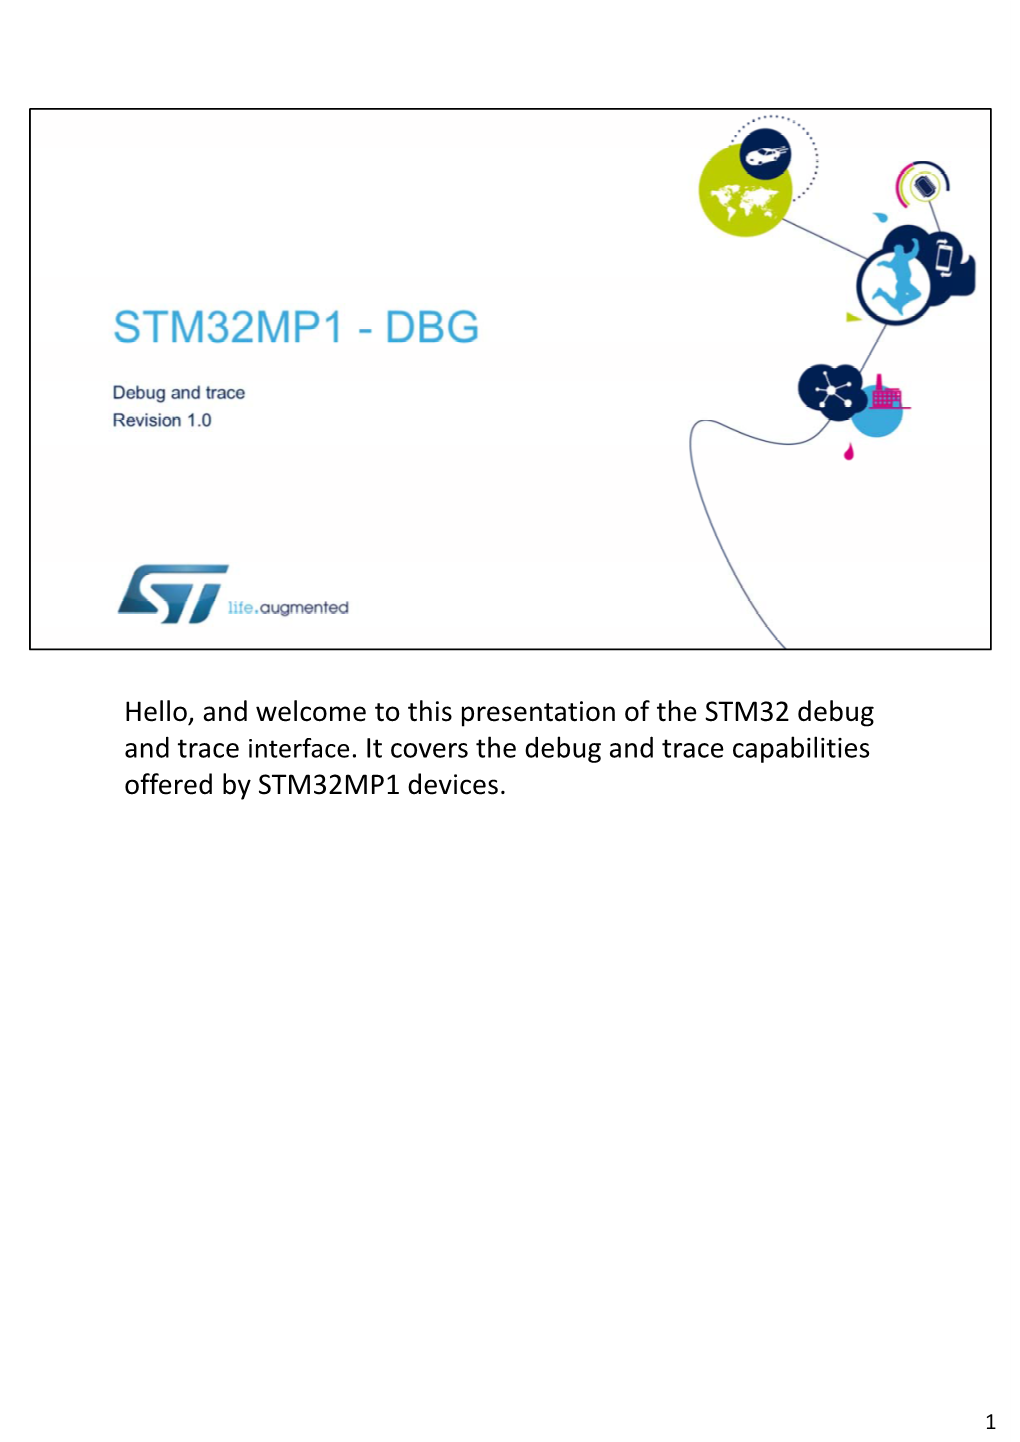 Hello, and Welcome to This Presentation of the STM32 Debug and Trace Interface